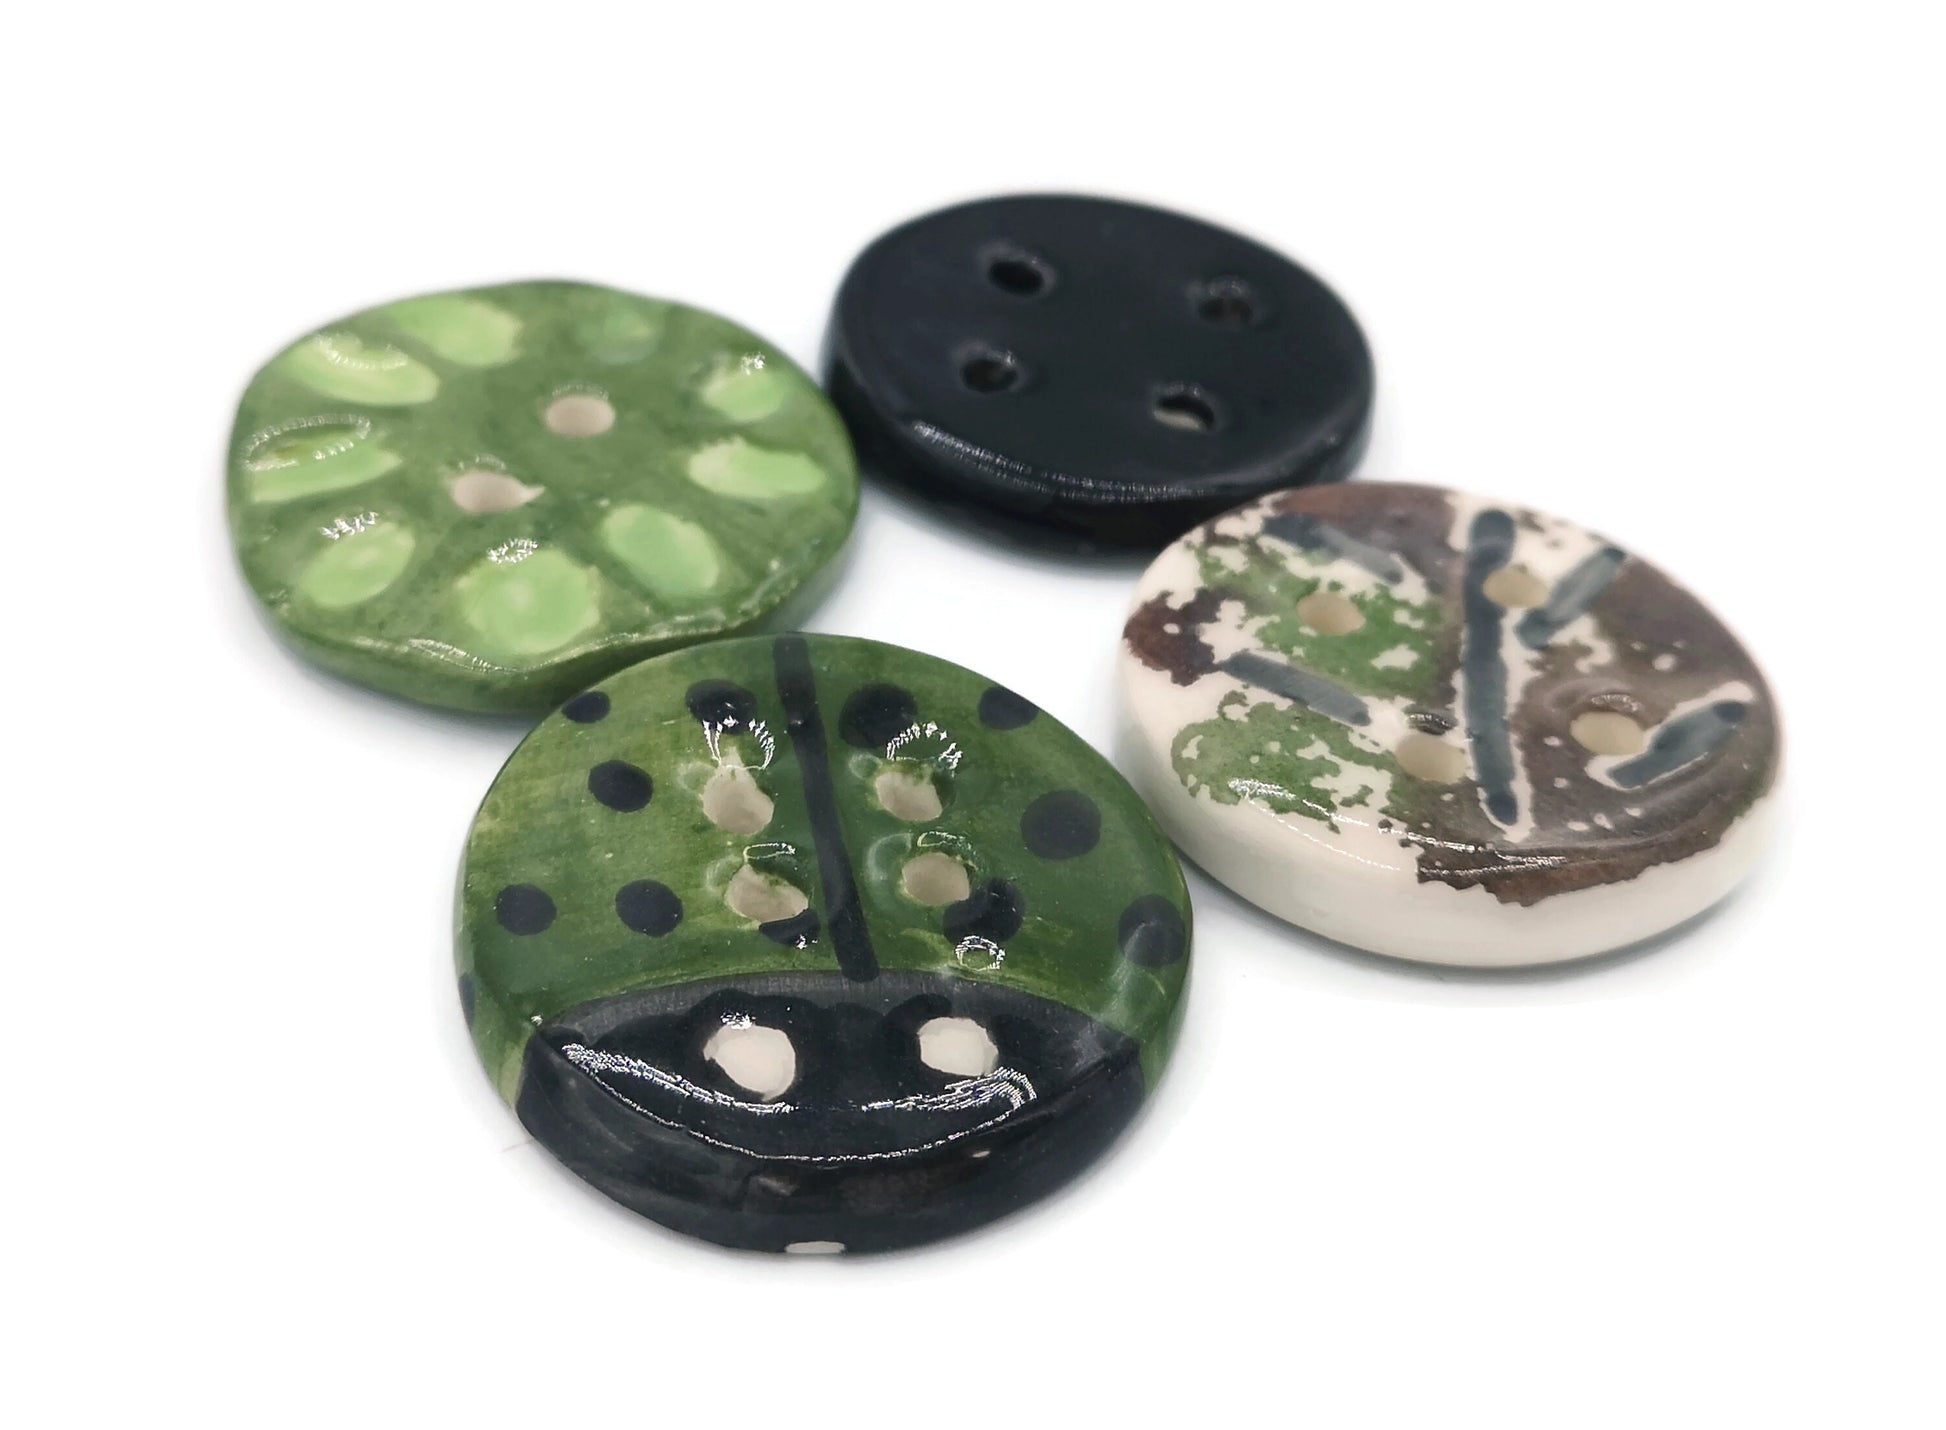 4Pcs Large Green Ceramic Buttons Hand Painted, Decorative Flat Sewing Buttons, Handmade Clay Buttons Round Shape 4 Holes, Best Sellers - Ceramica Ana Rafael